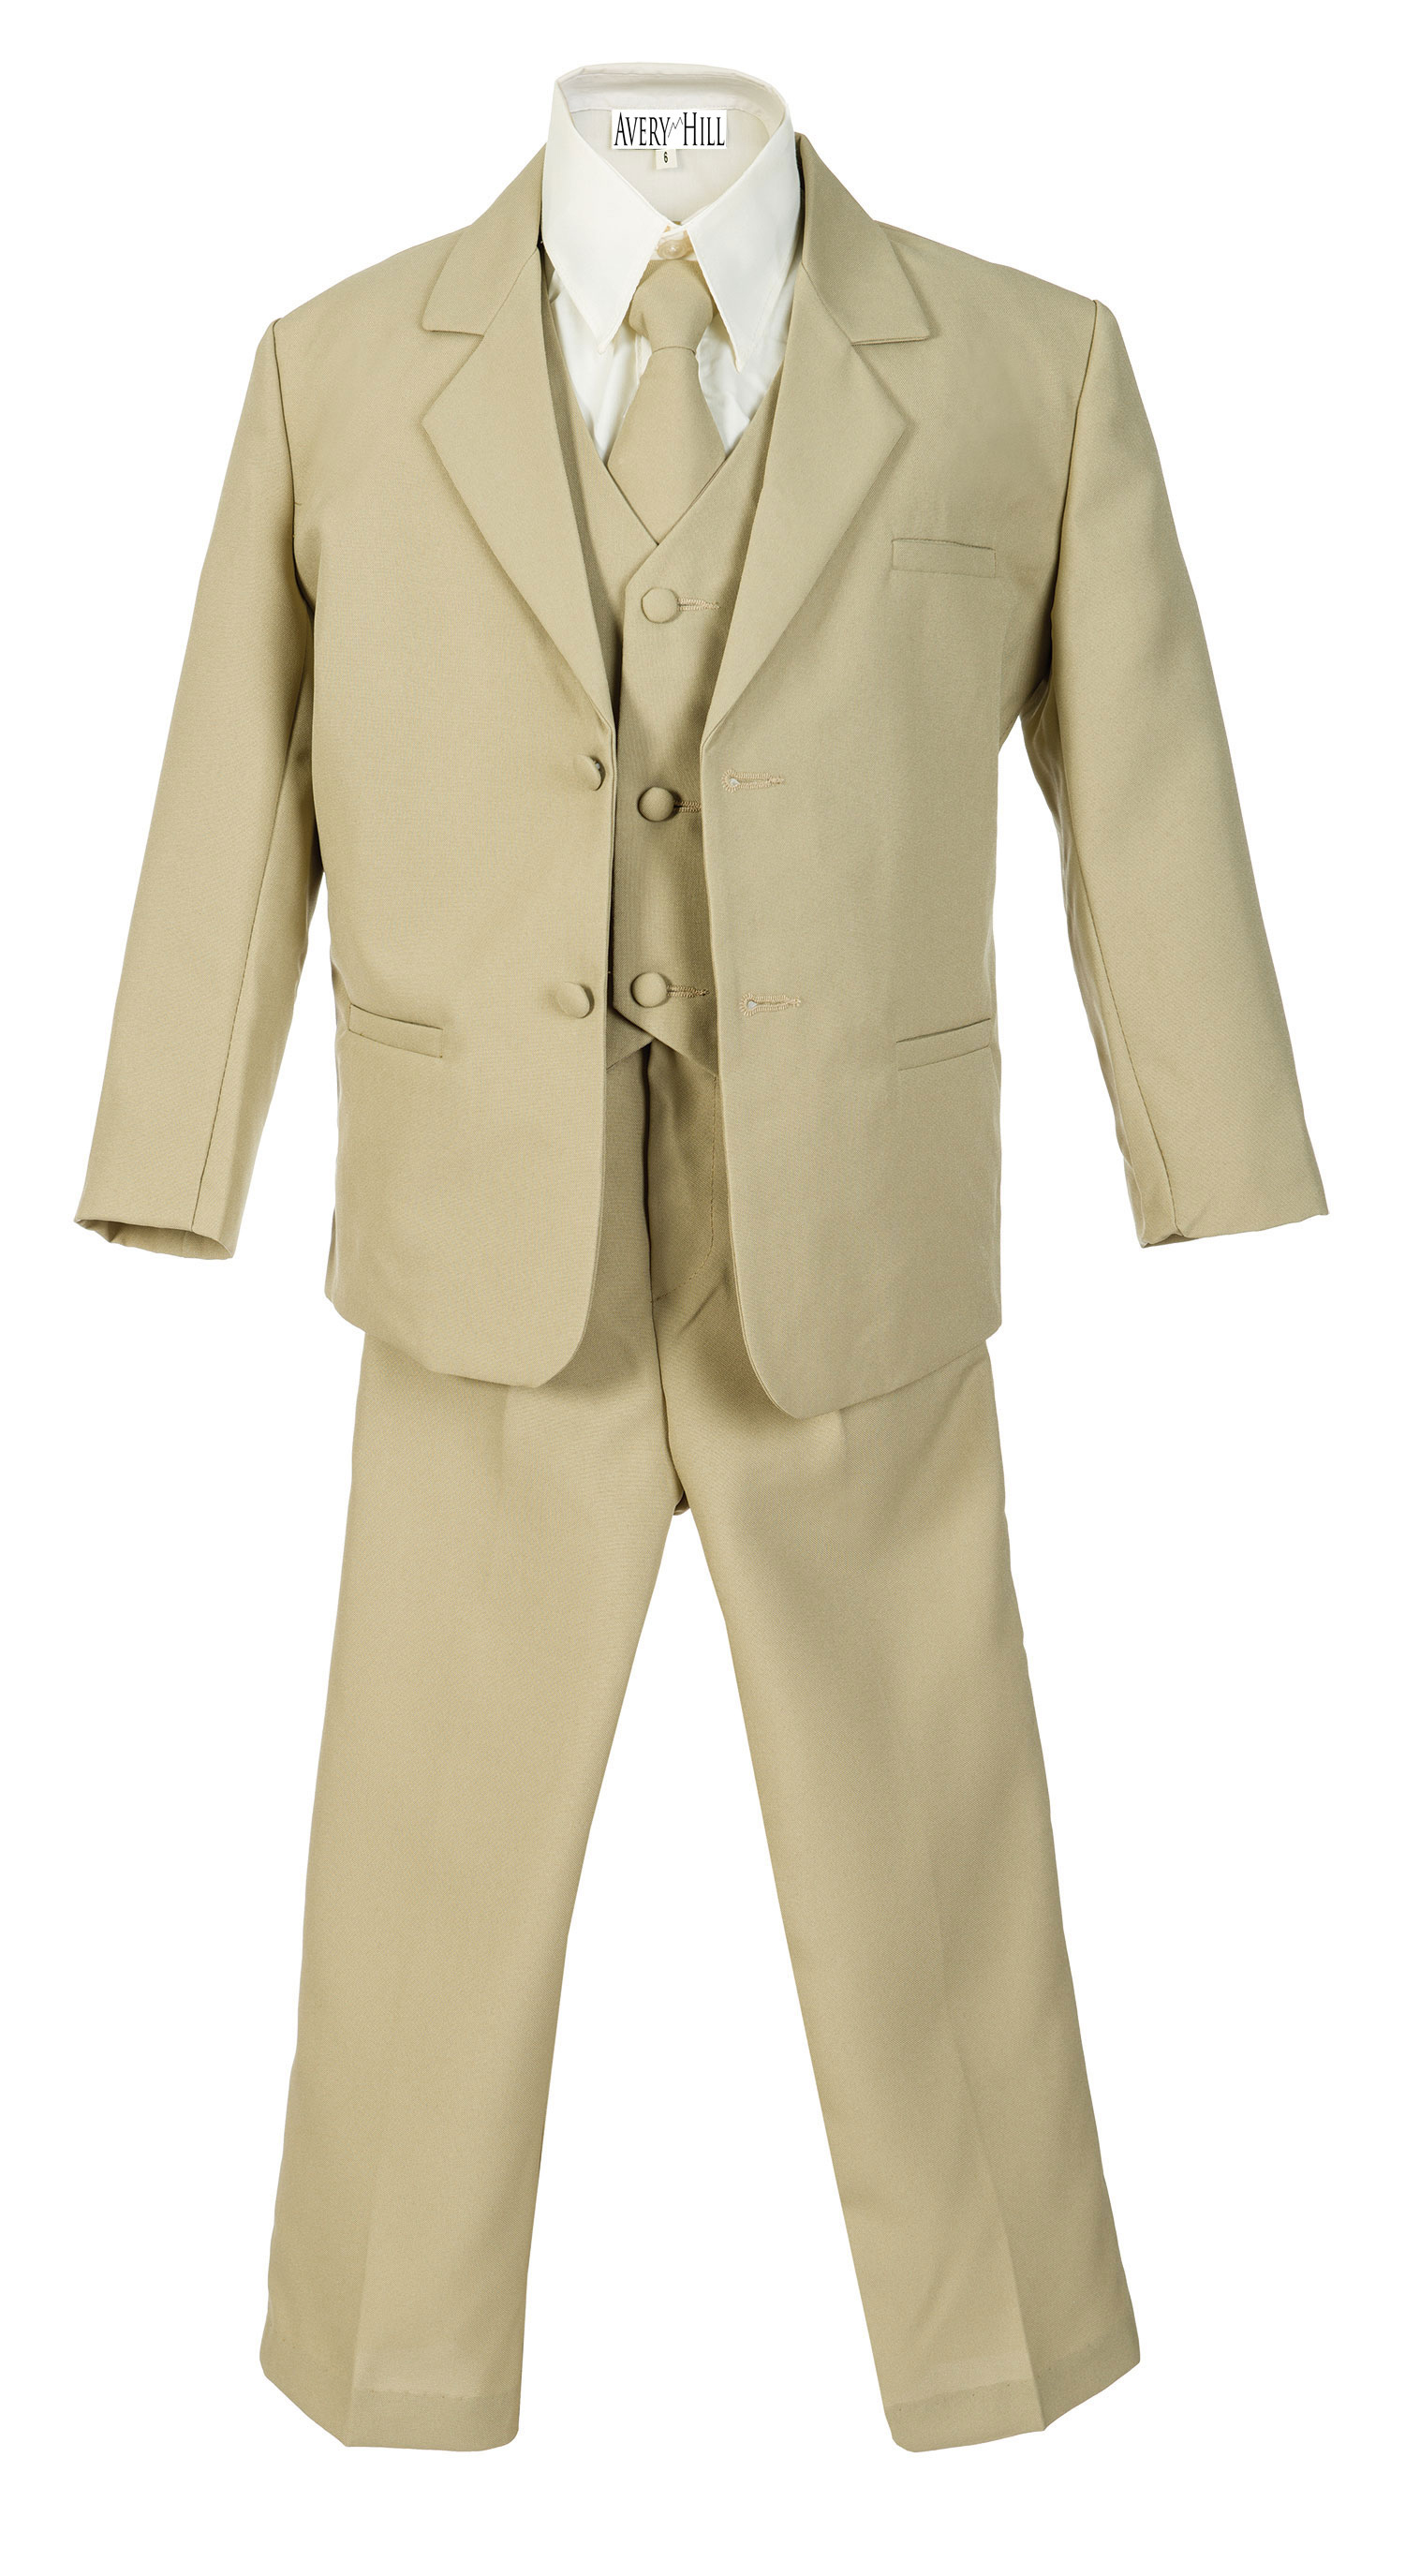 Selected Color is KHAKI-1